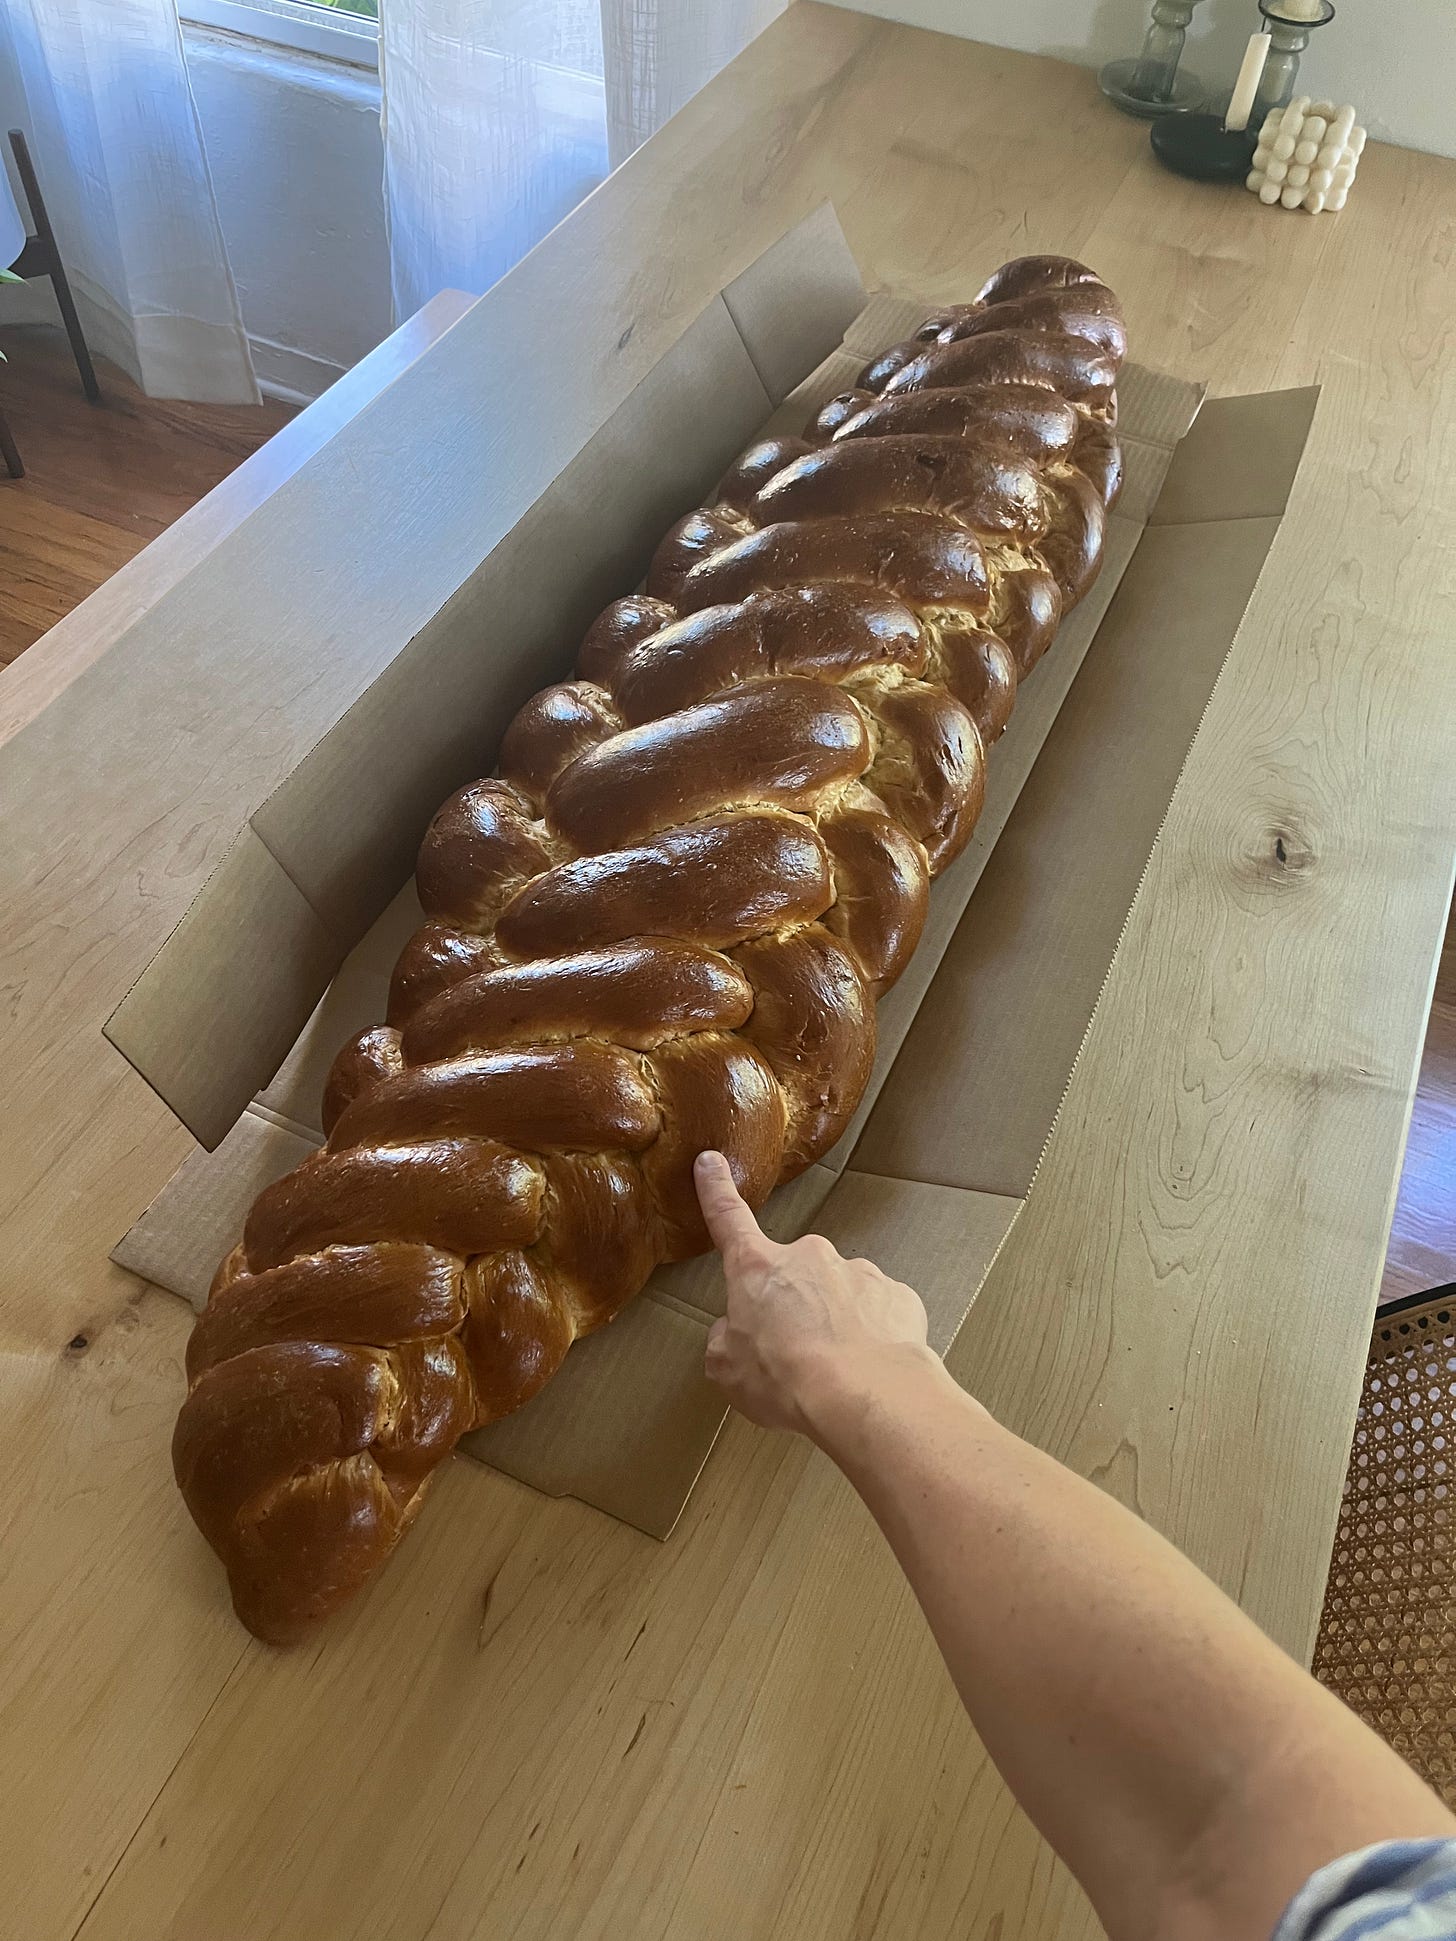 Challadad challah bread on a dining room table